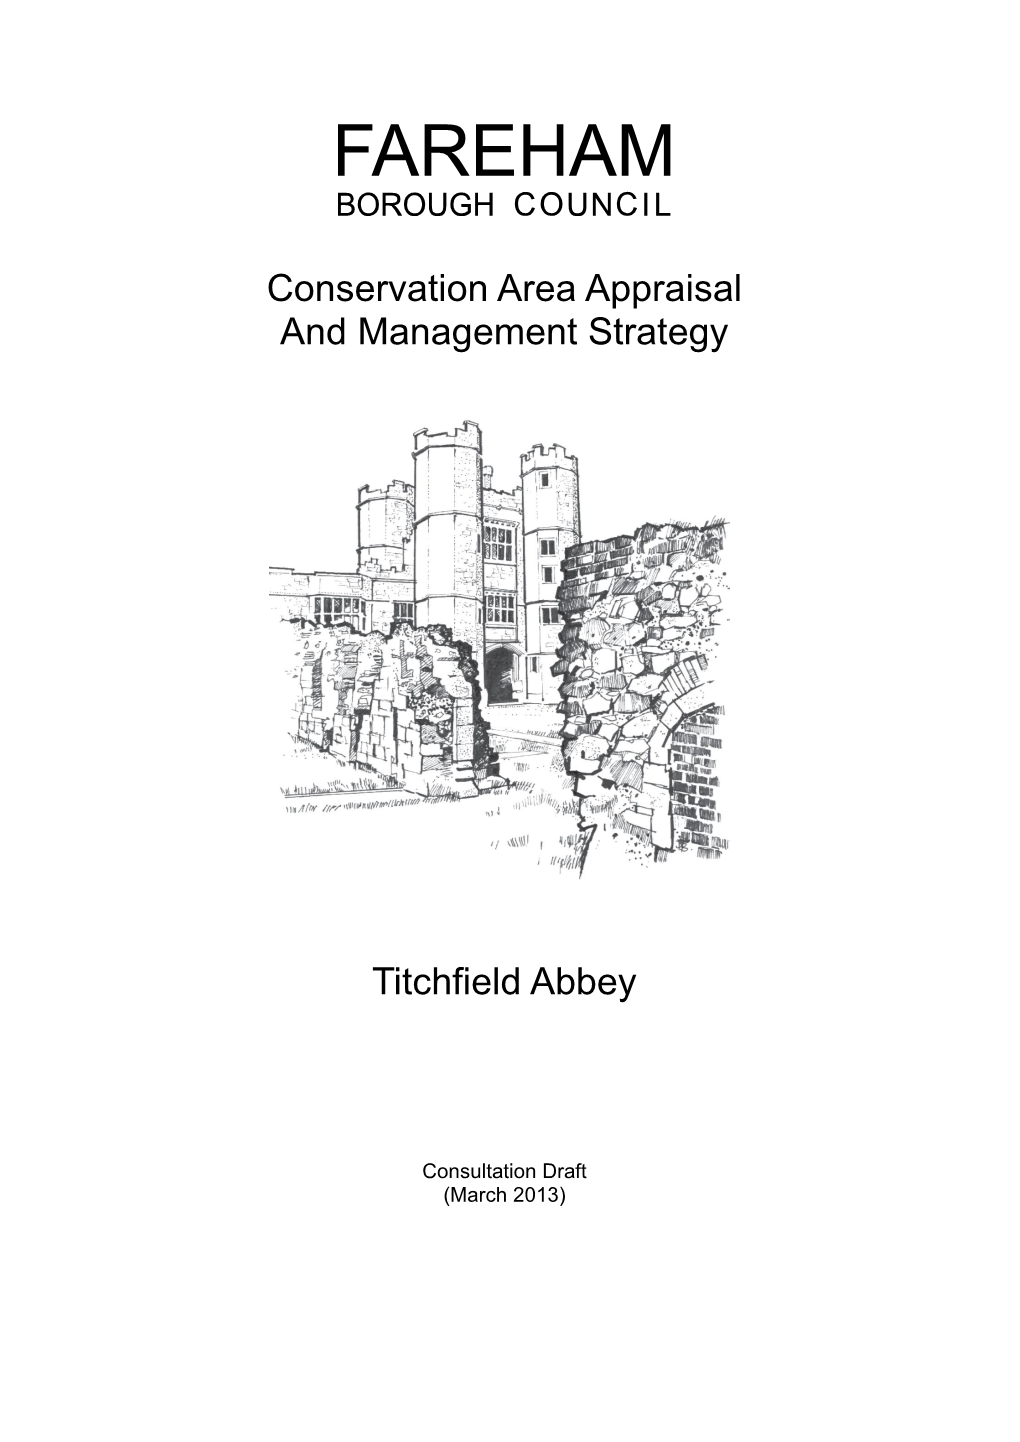 Conservation Area Appraisal and Management Strategy Titchfield